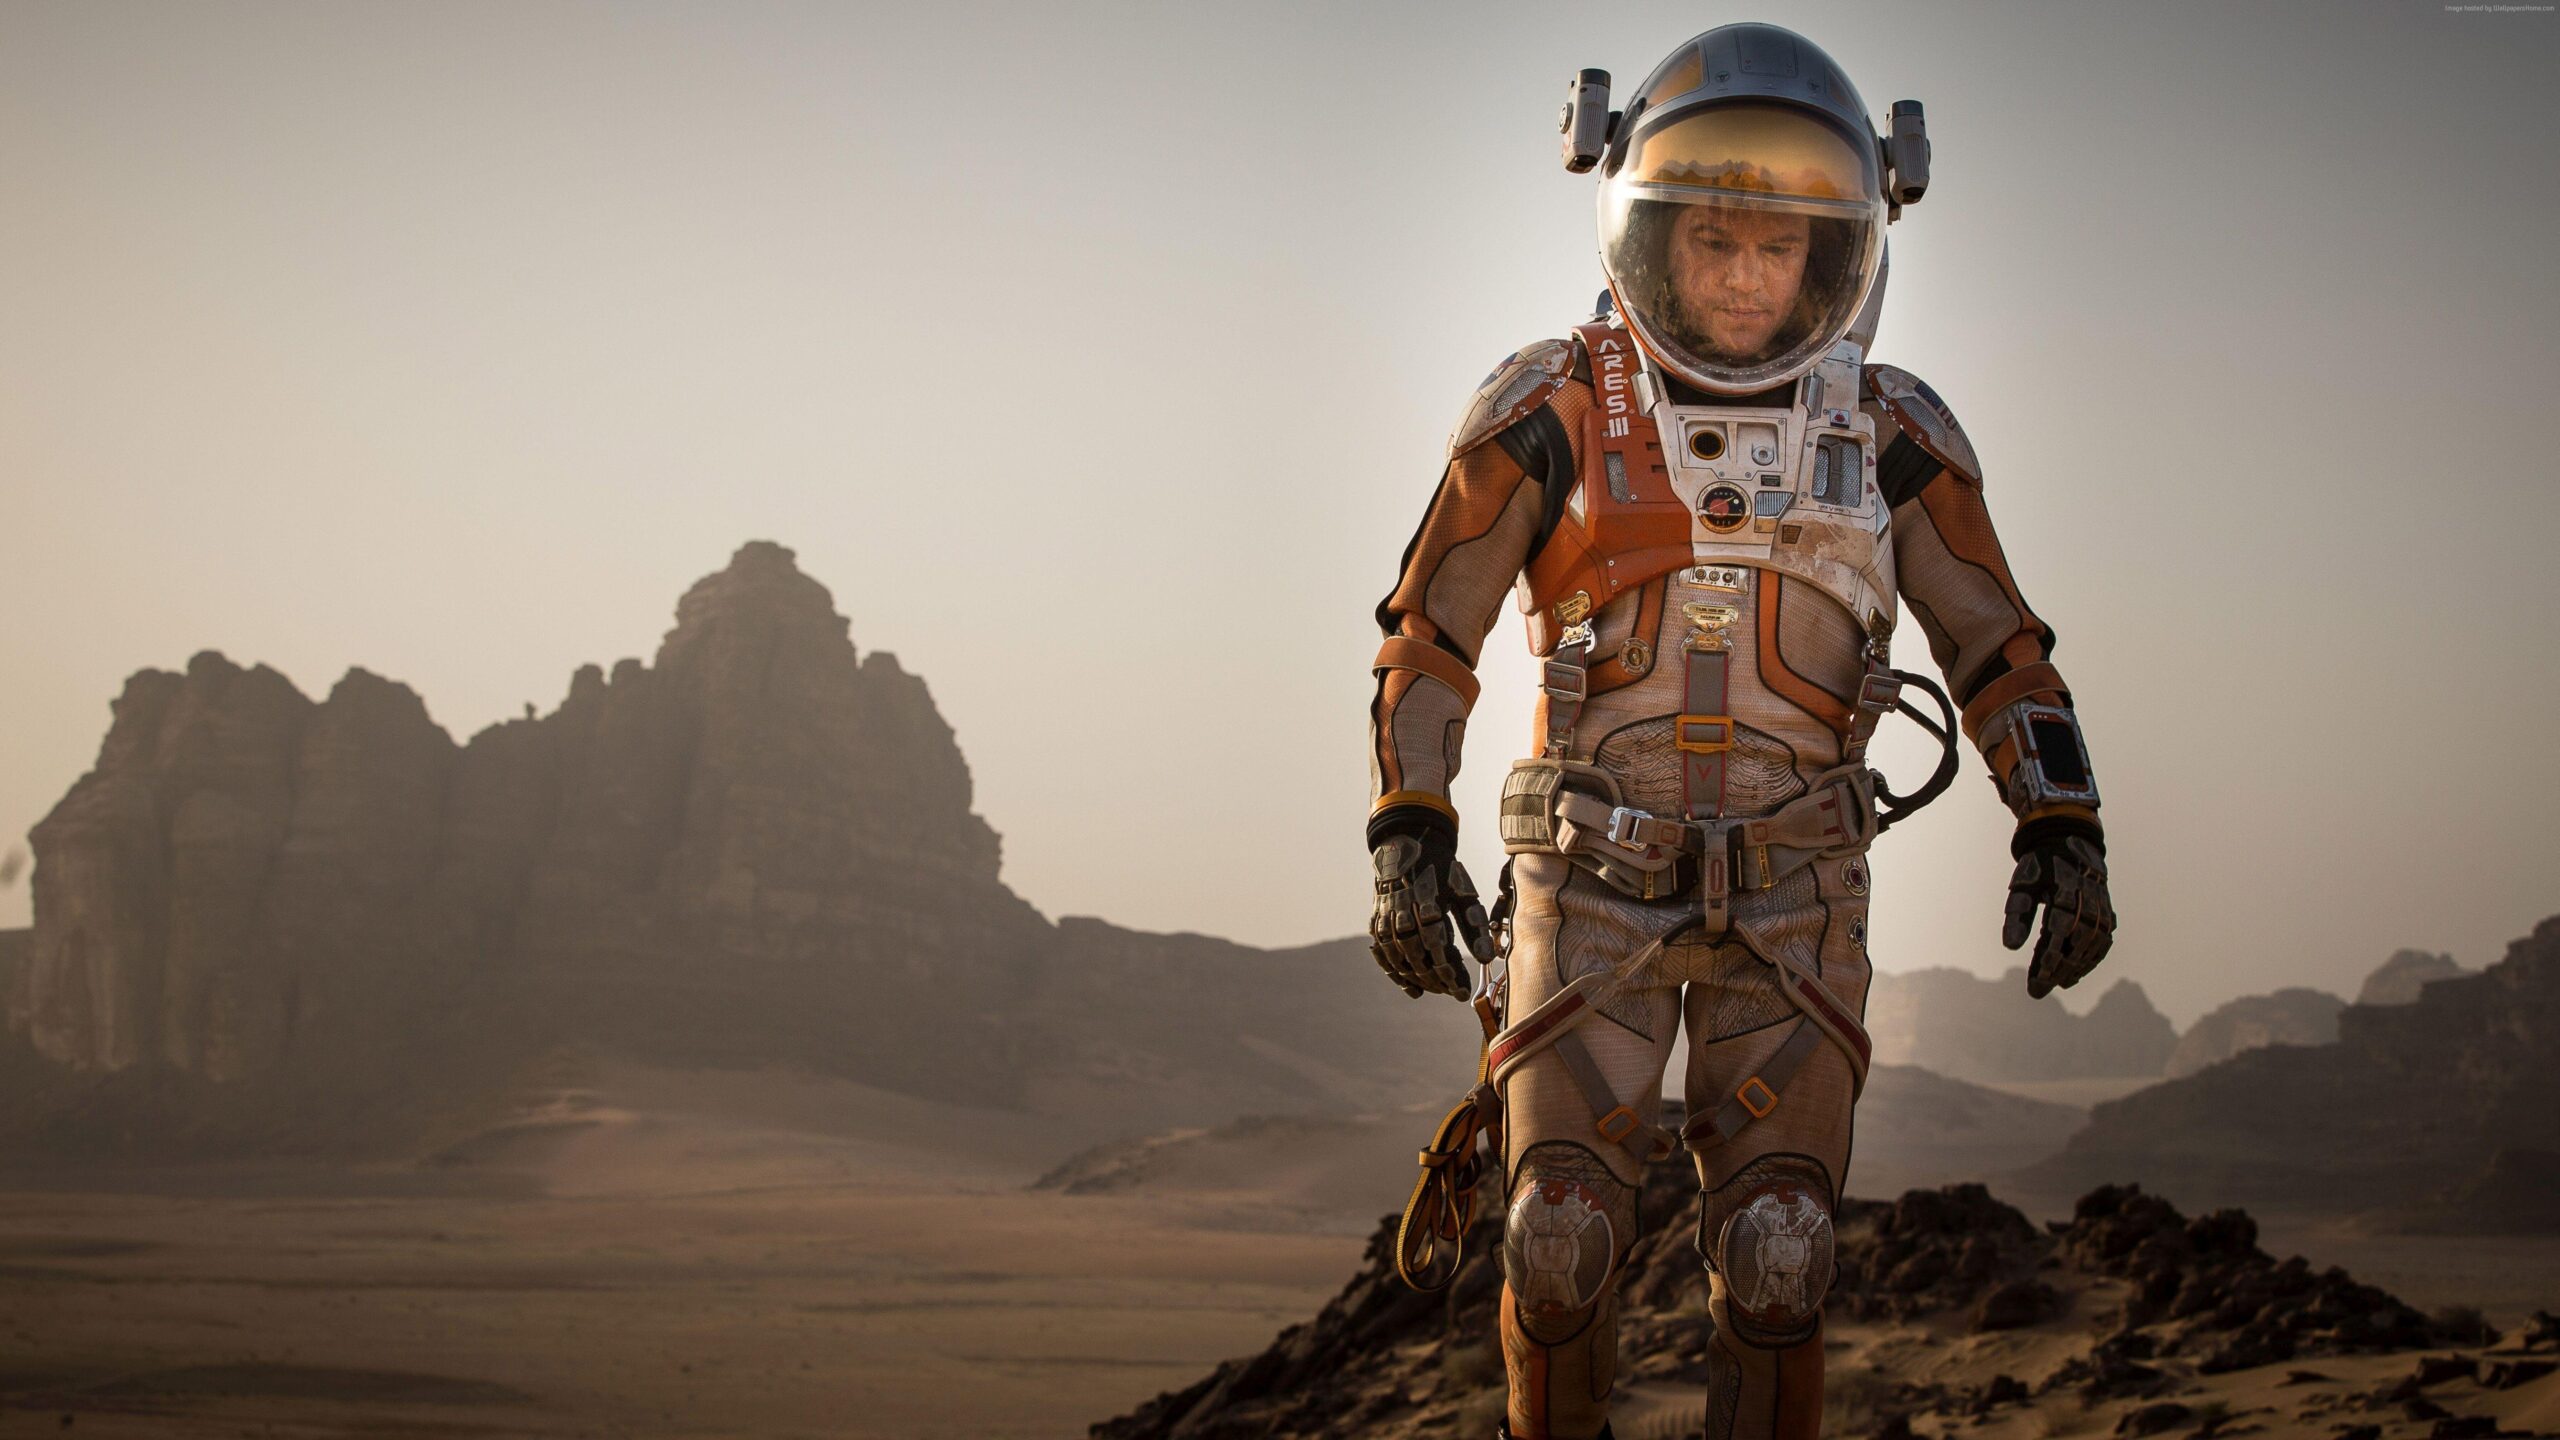 The Martian Wallpaper, Movies The Martian, Best Movies of